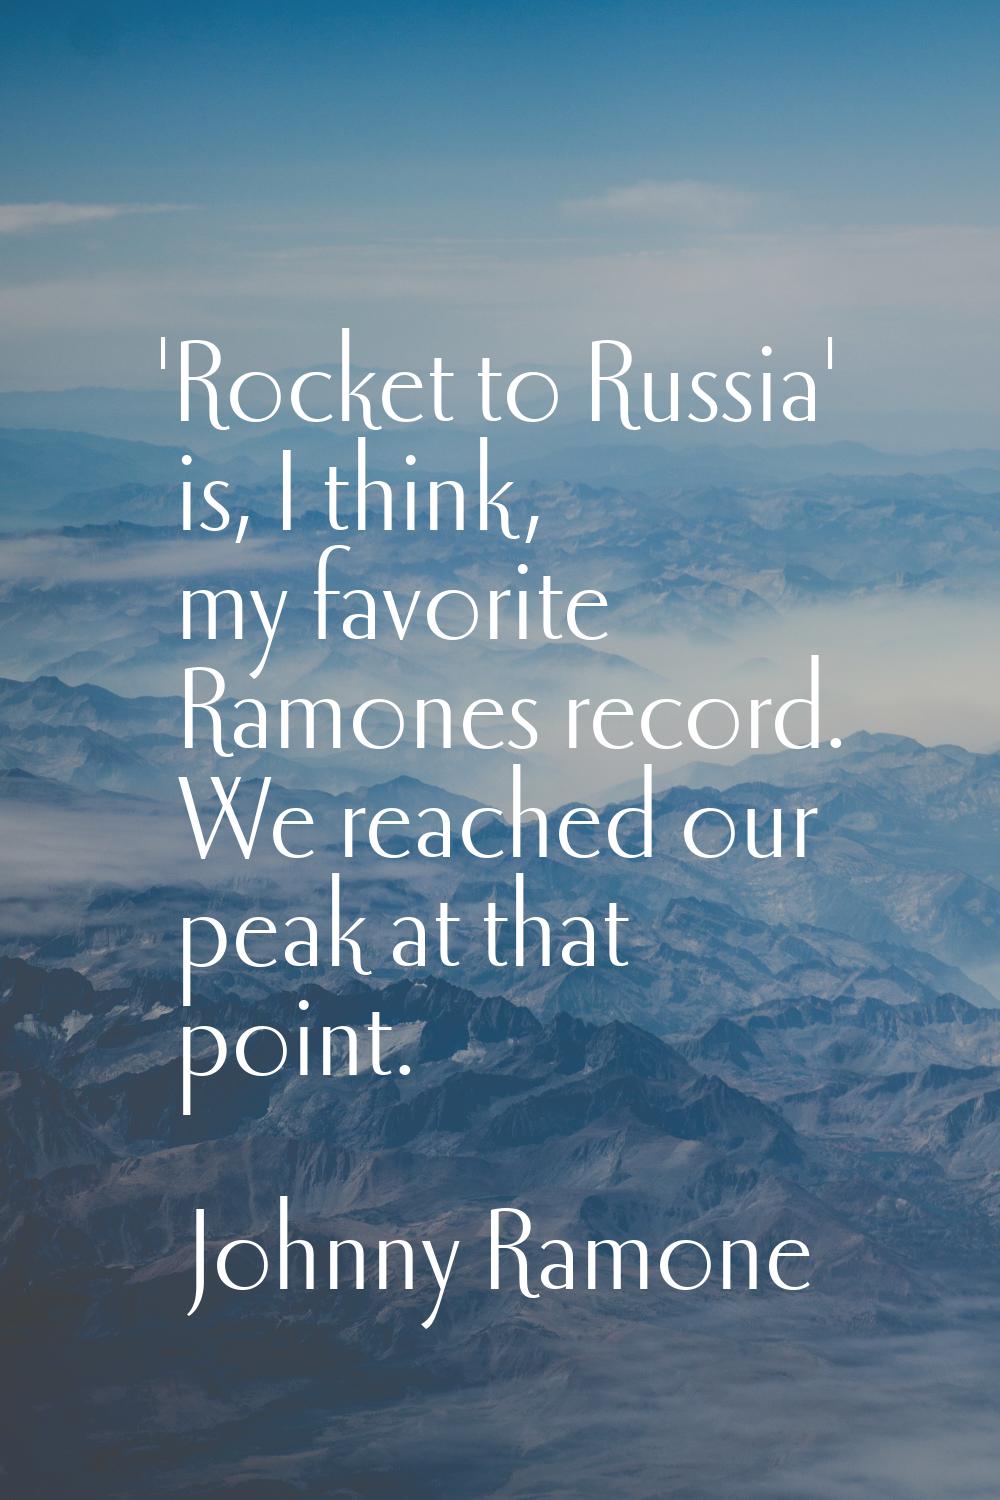 'Rocket to Russia' is, I think, my favorite Ramones record. We reached our peak at that point.